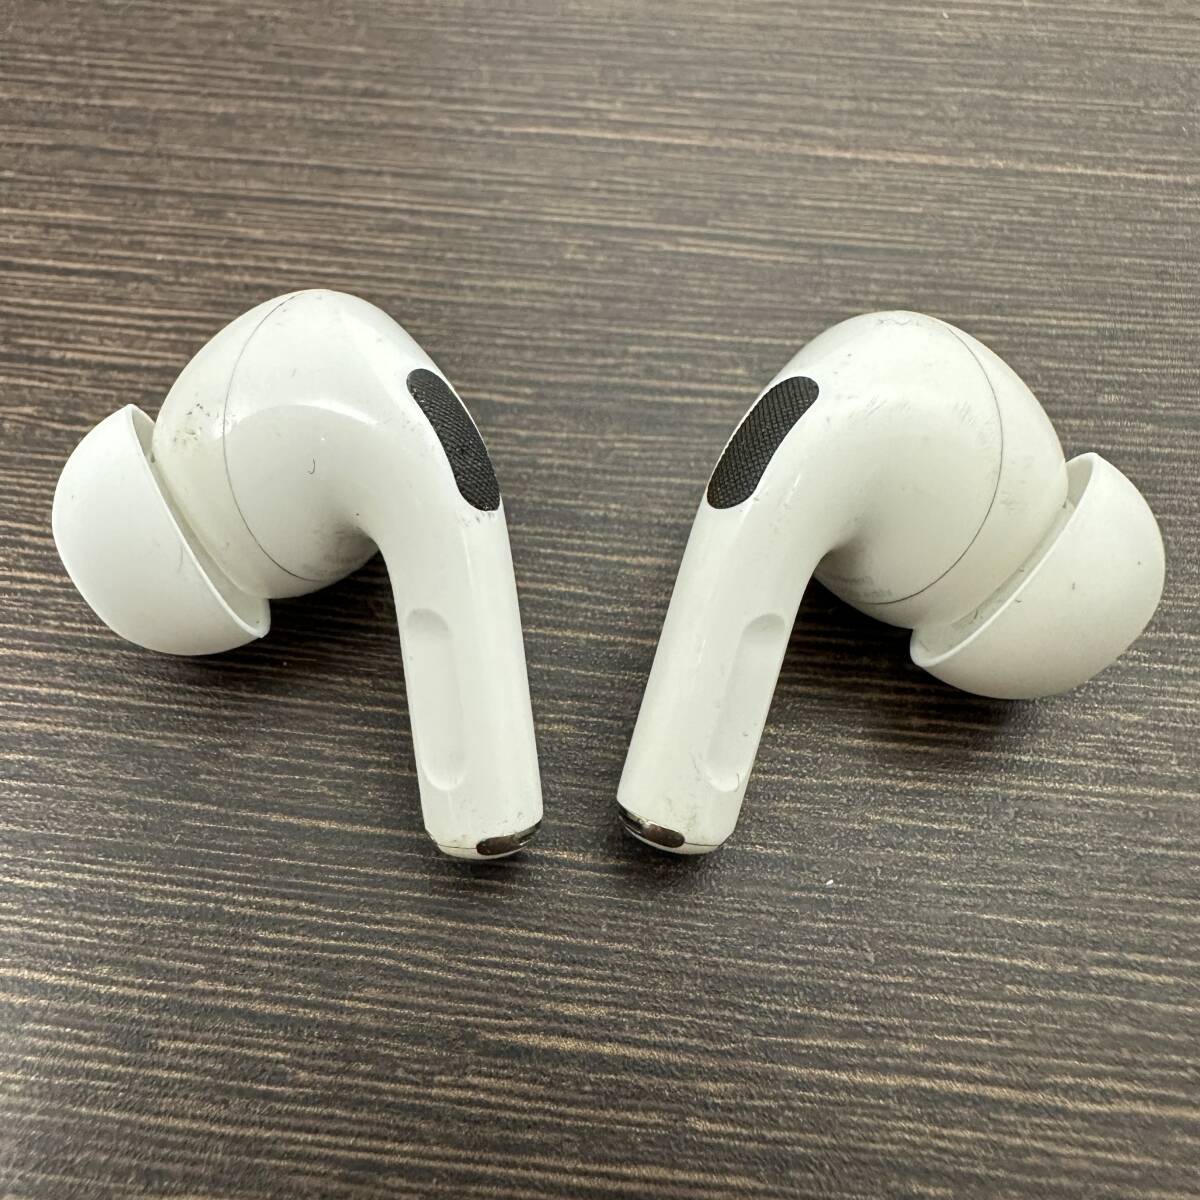 ☆★H1585【訳あり品・送料込み】Apple Airpods PRO A2190 A2083 A2084 第1世代 Apple ID関連付け未解除 AirPods Pro MagSafe 充電ケース_画像7